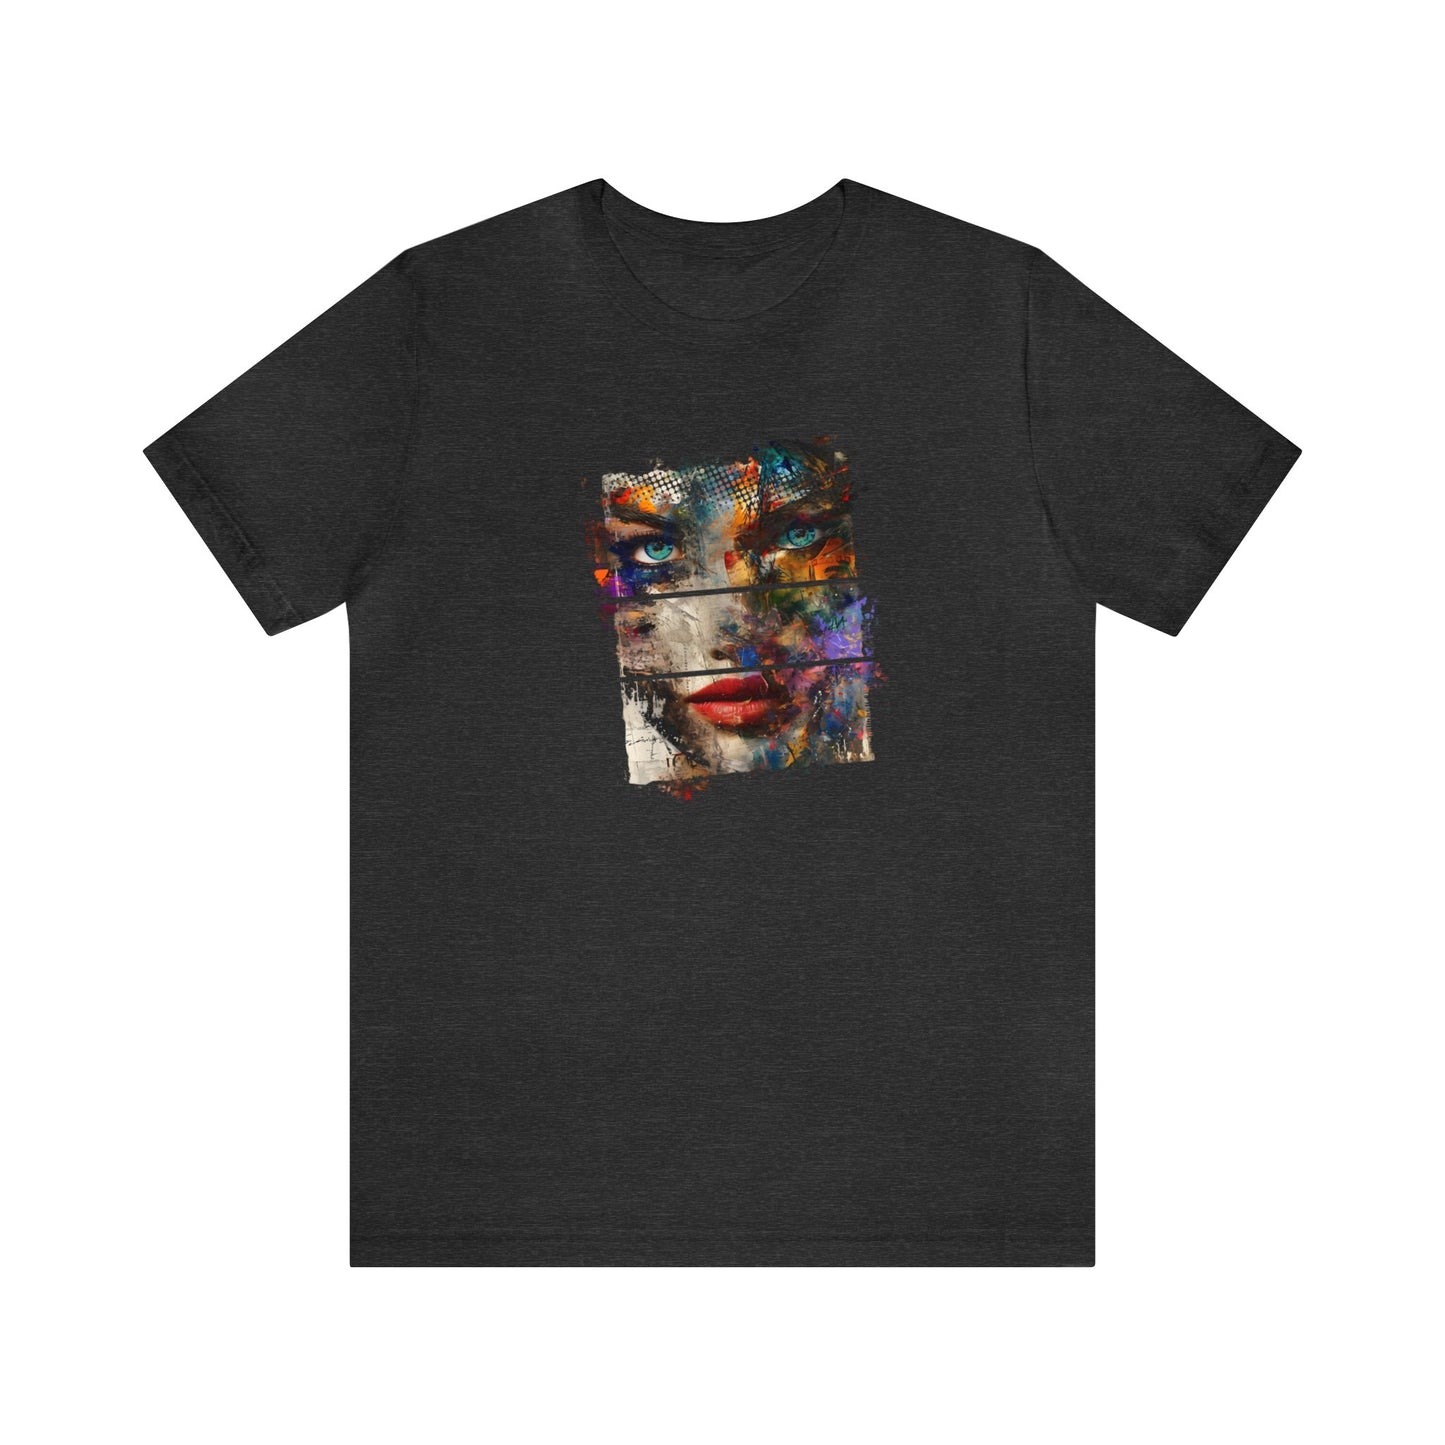 Modern Abstract Woman's Face Tee | Graffiti Style Colors | Unisex Jersey Shirt, Urban Style Colorful Shirt Top Graphic Tee Artsy Shirt